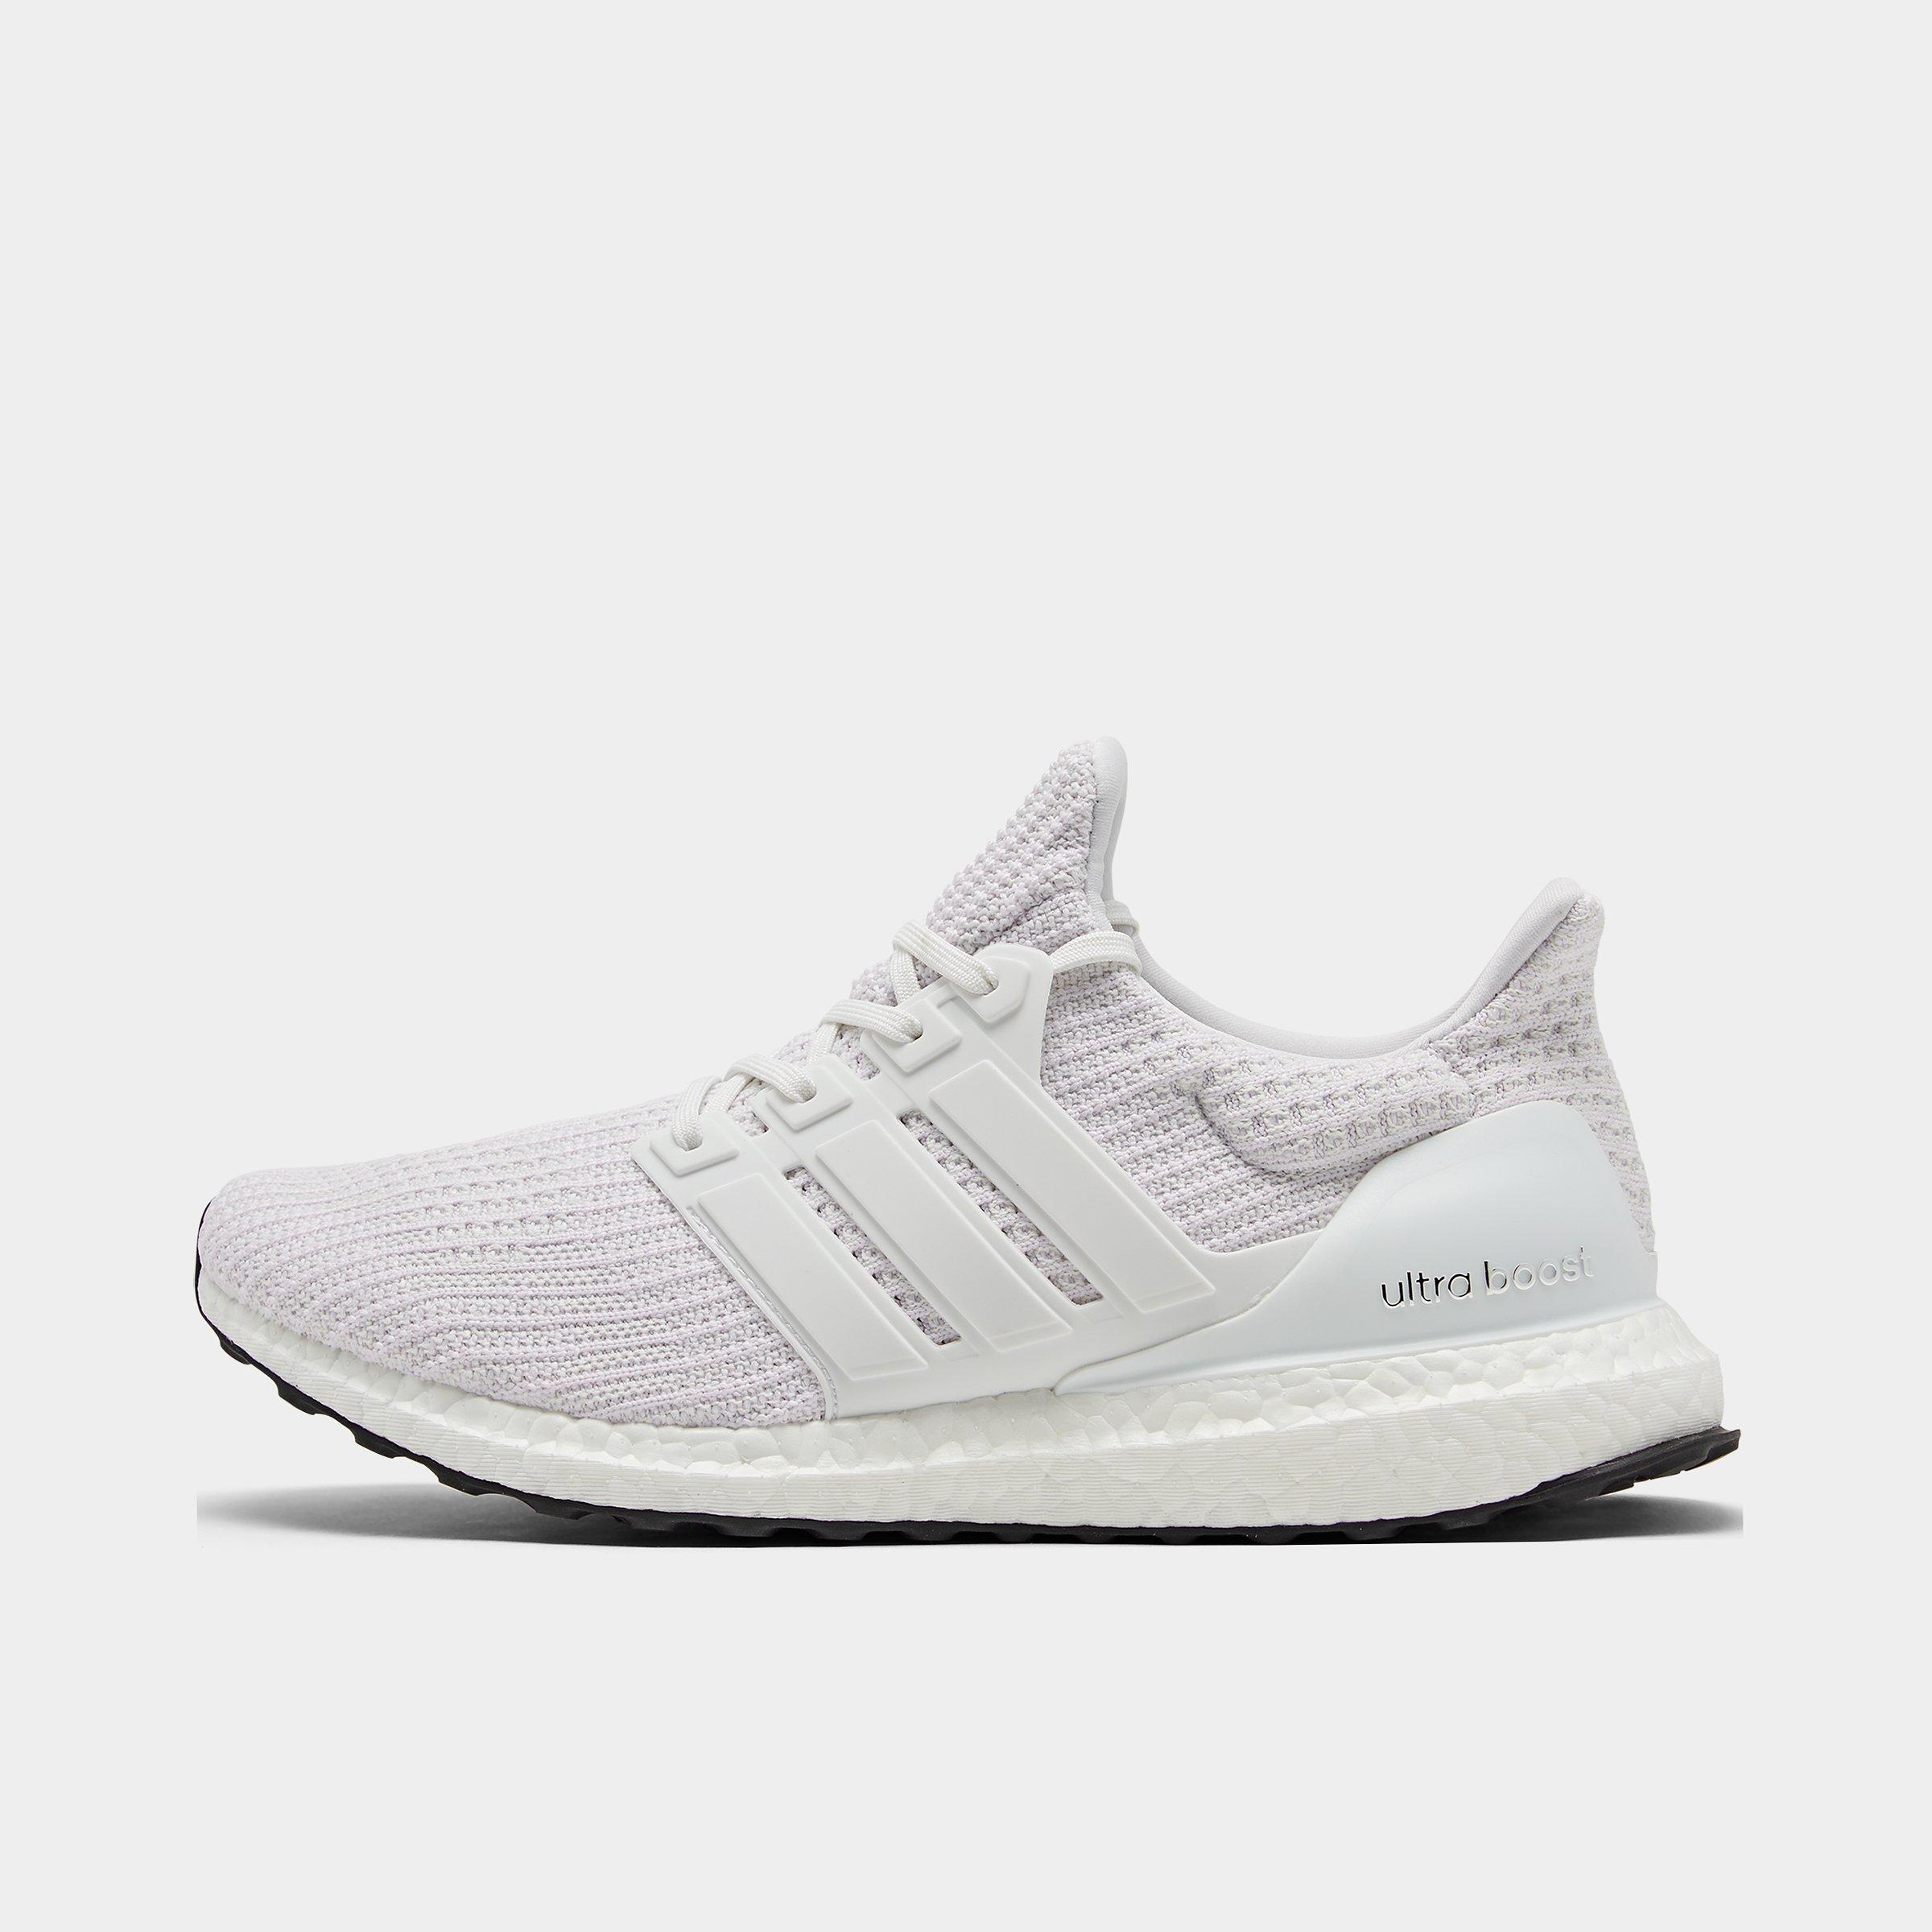 UPC 191028361850 product image for Adidas Men's UltraBOOST Running Shoes in White/White Size 11.5 Knit | upcitemdb.com